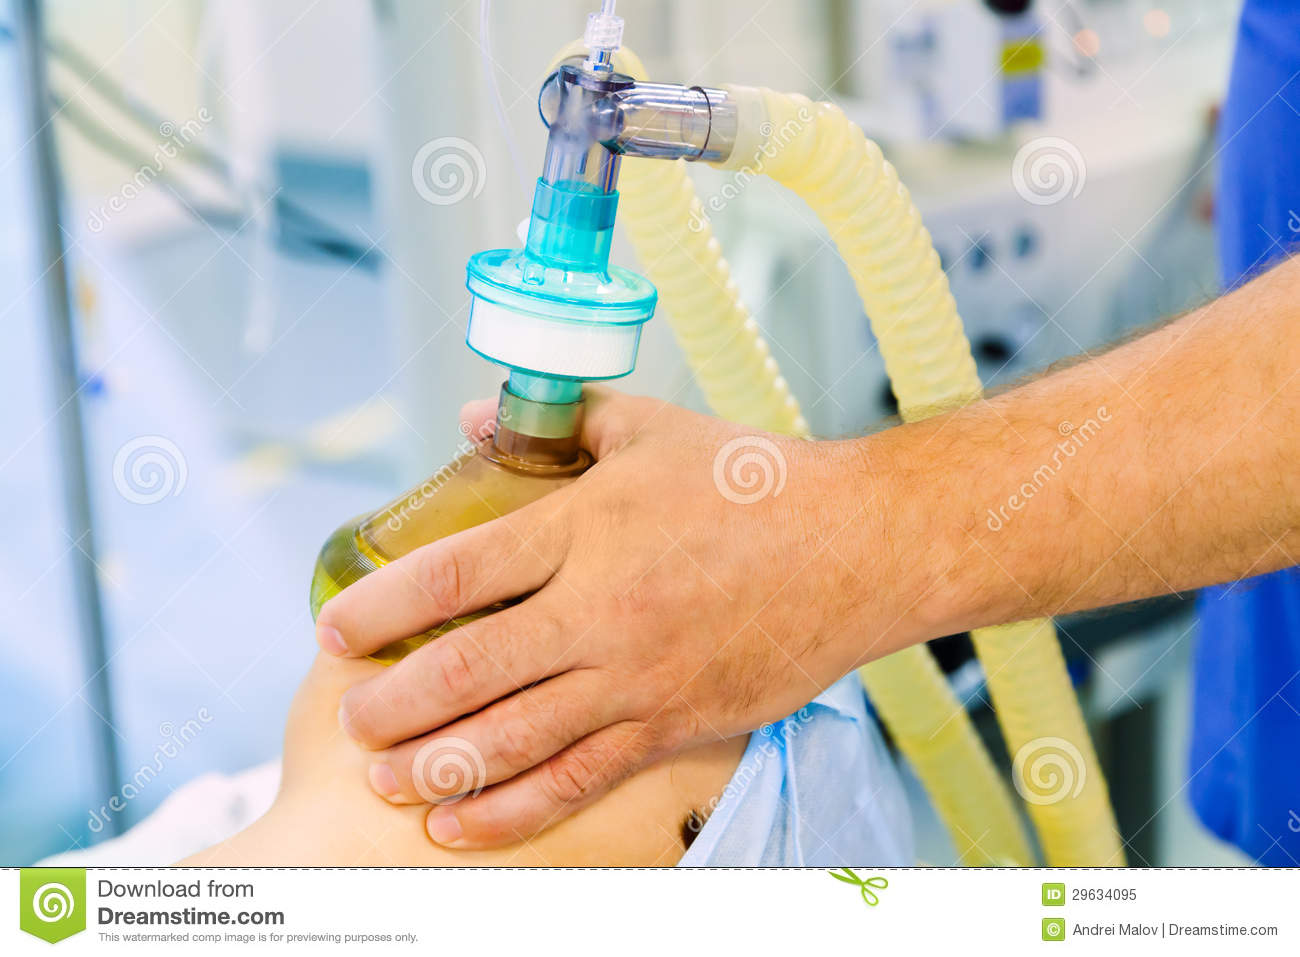 Patient With Mask Ventilation Royalty Free Stock Photo   Image    